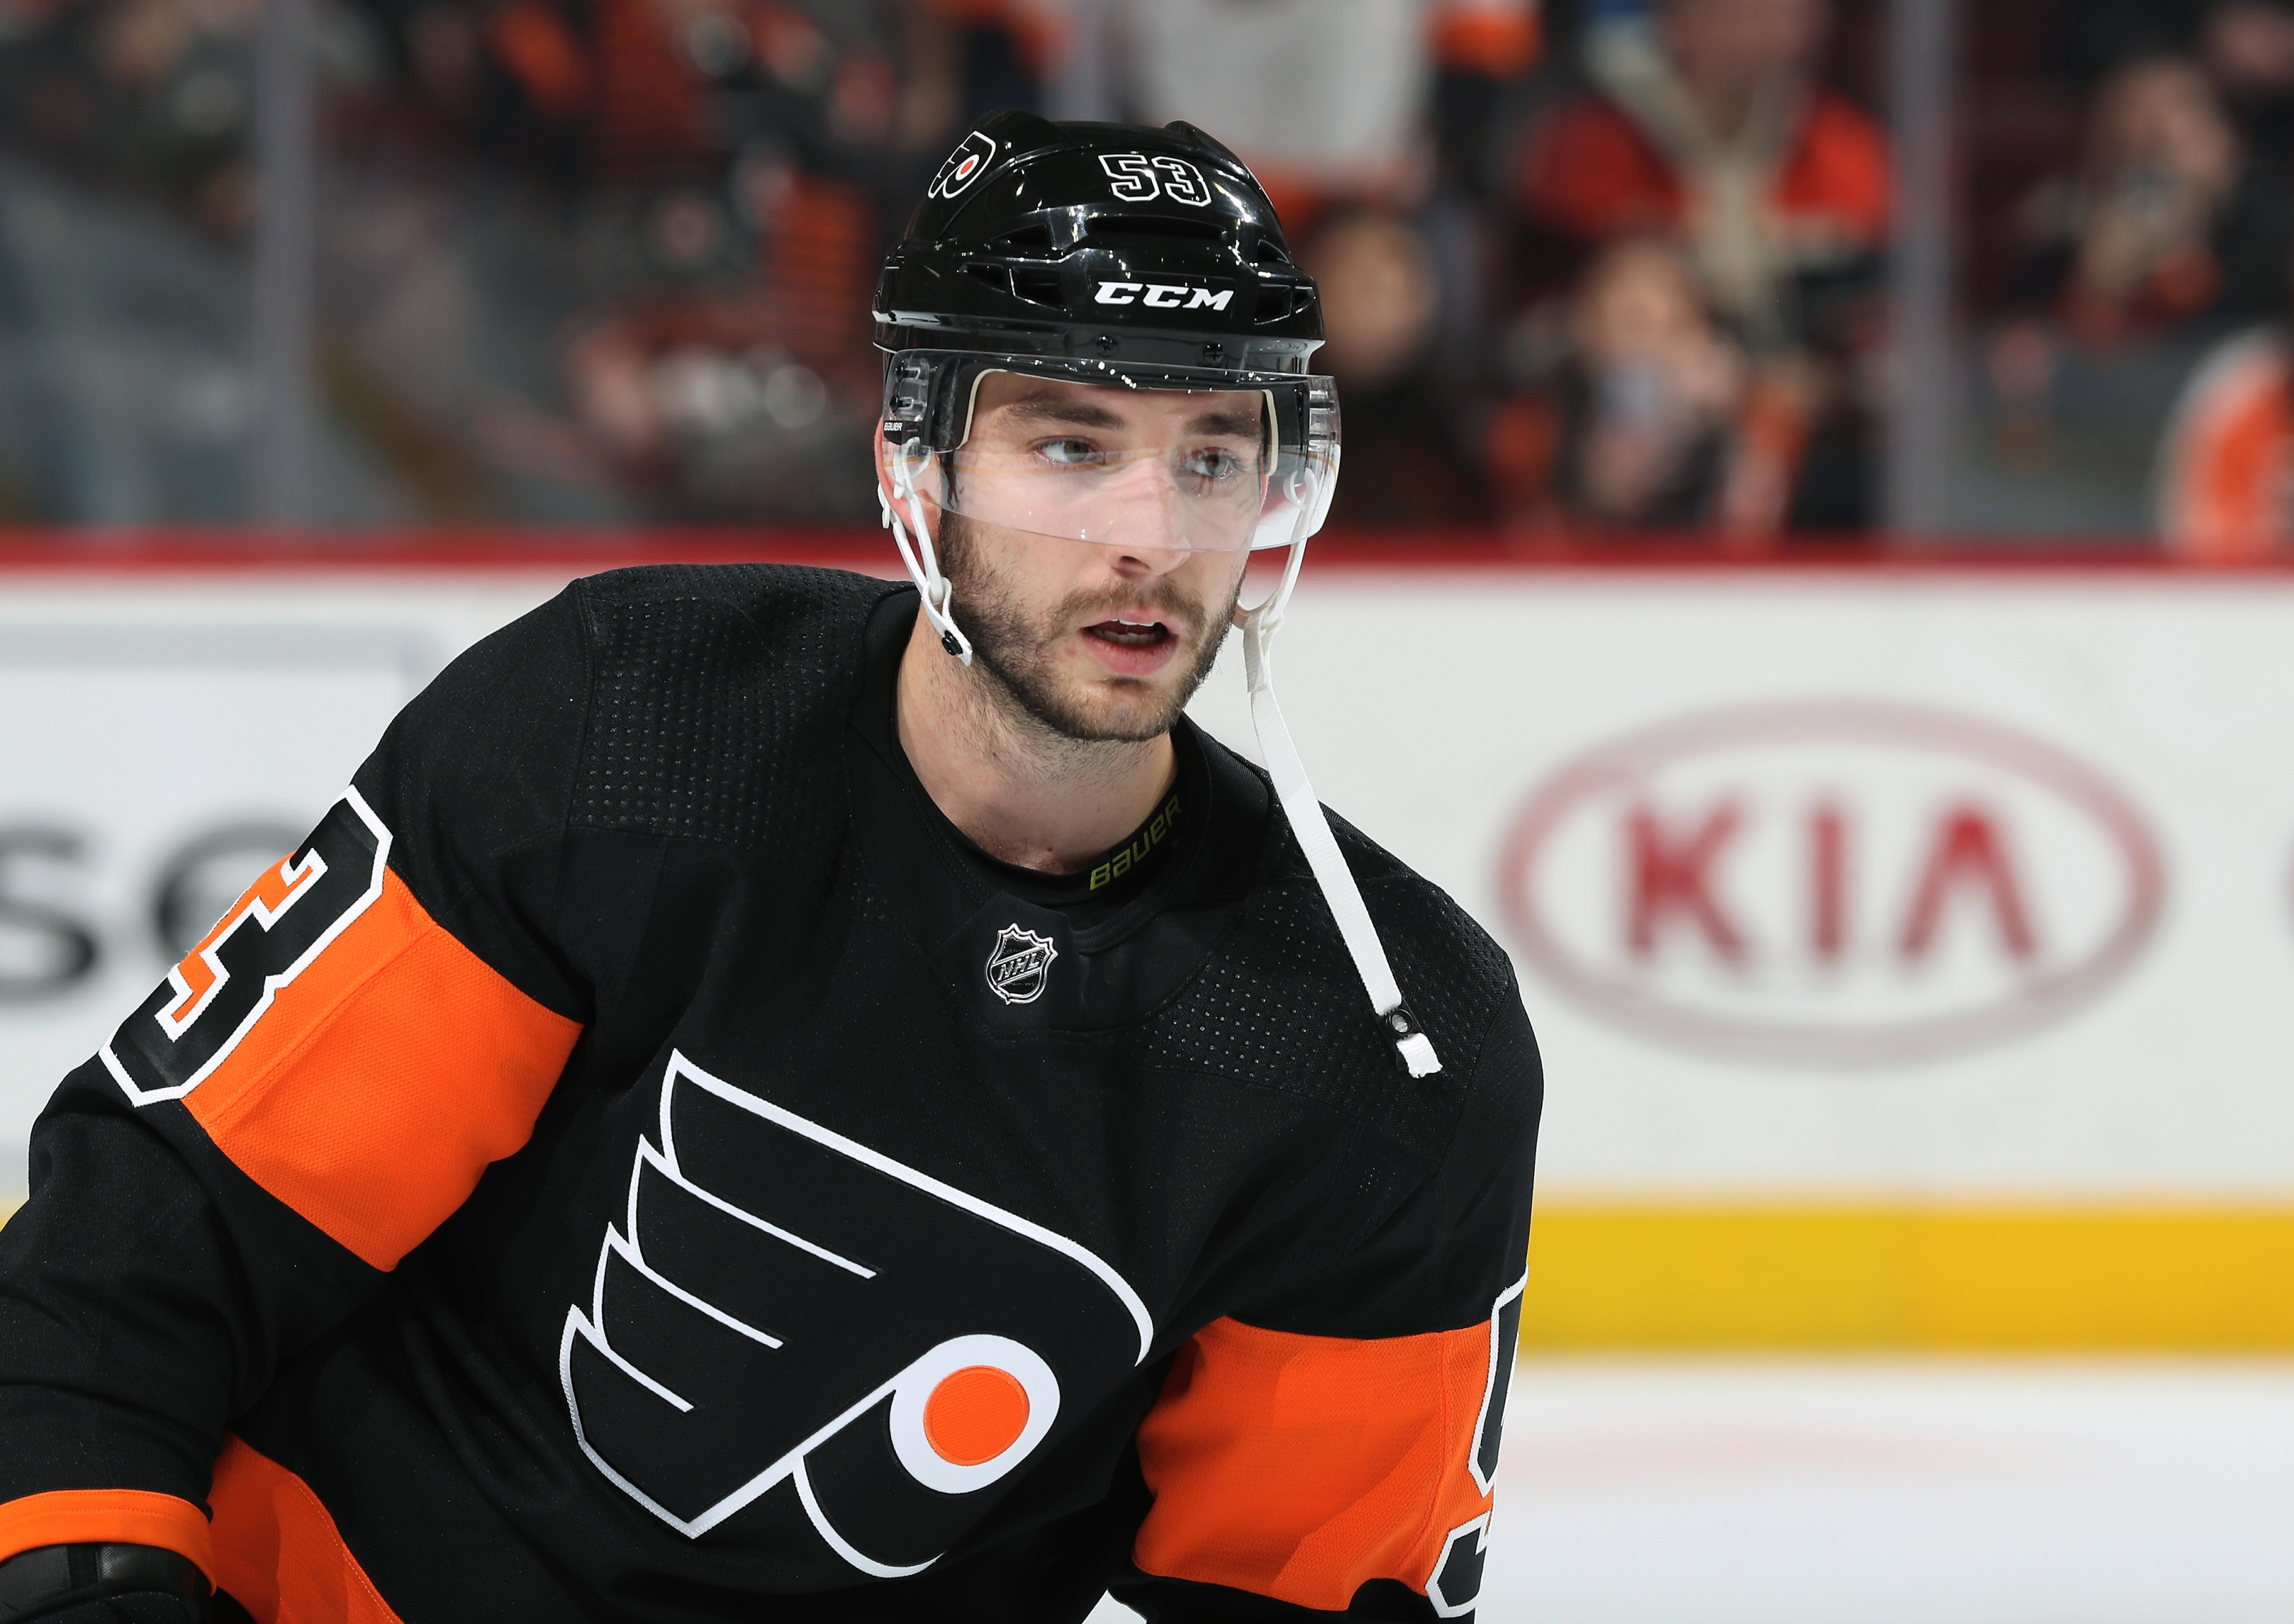 Report: Flyers' Gostisbehere available for trade